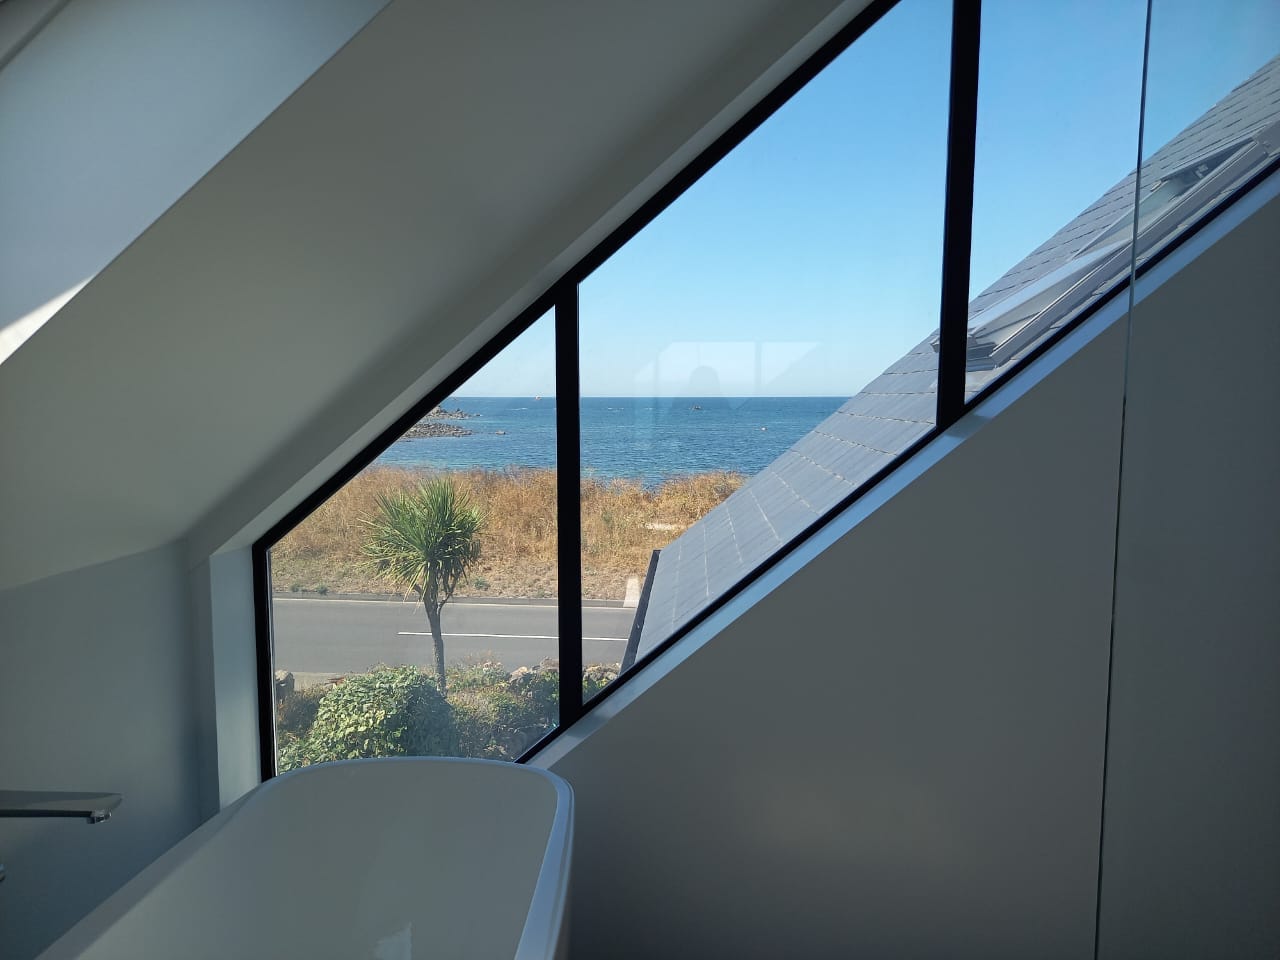 arresting views and bathroom privacy afforded by shaped privacy glass from Smartglass International - daytime view